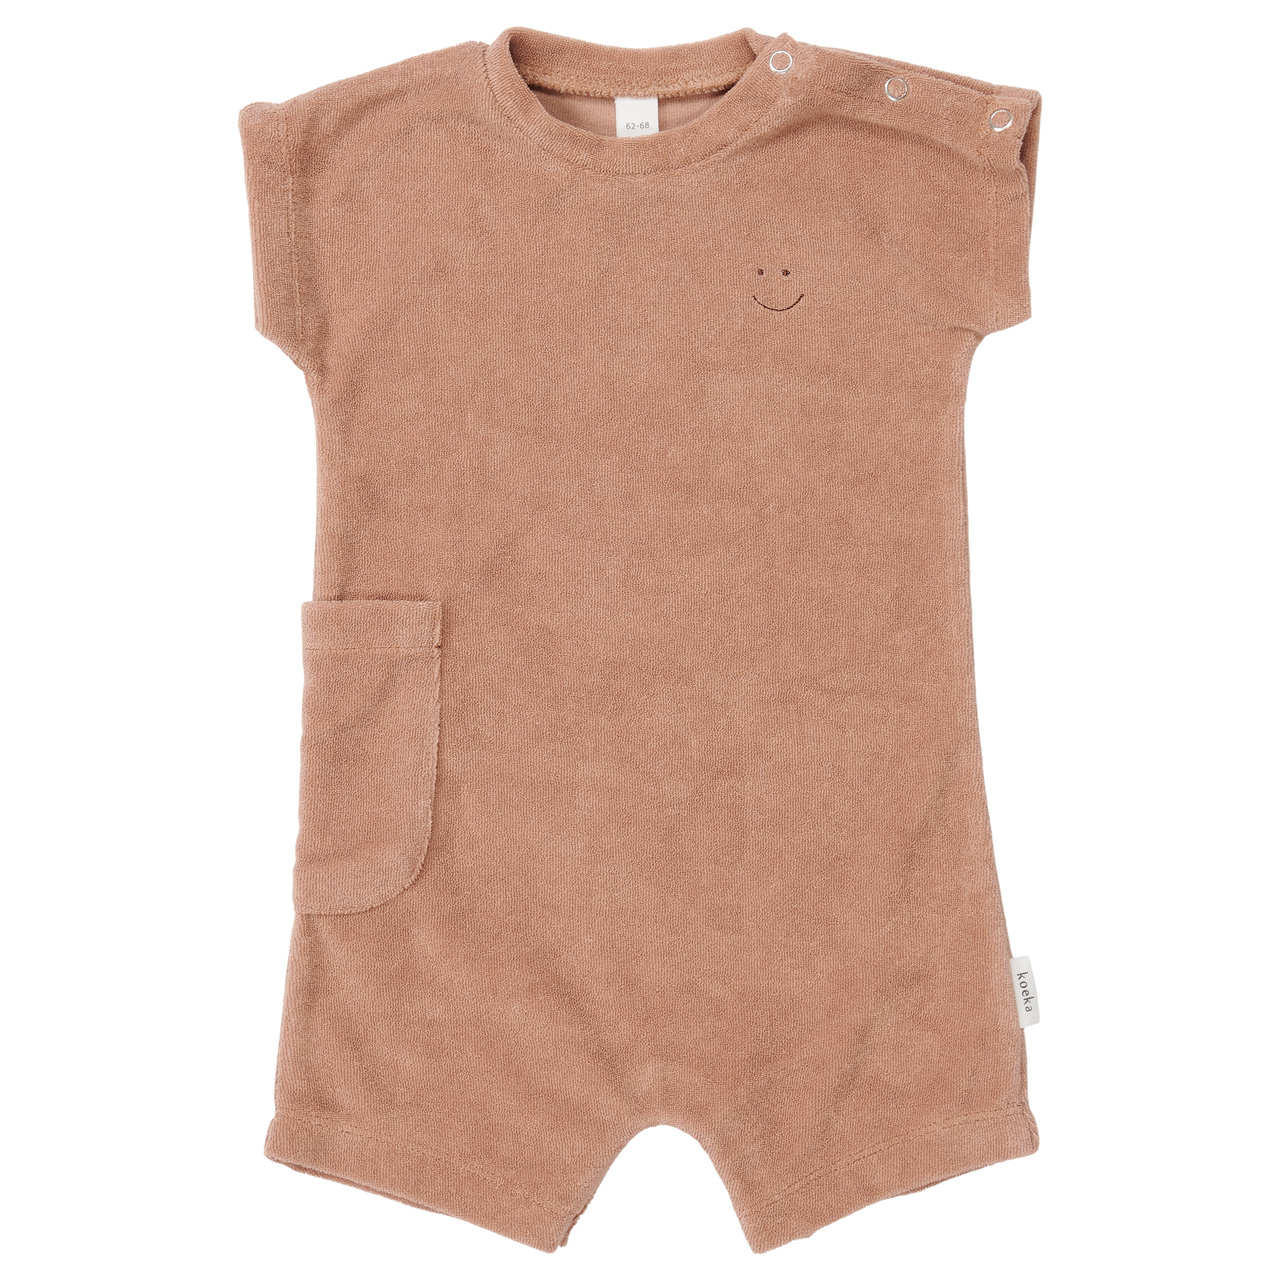 Baby one piece short Royan soft earth